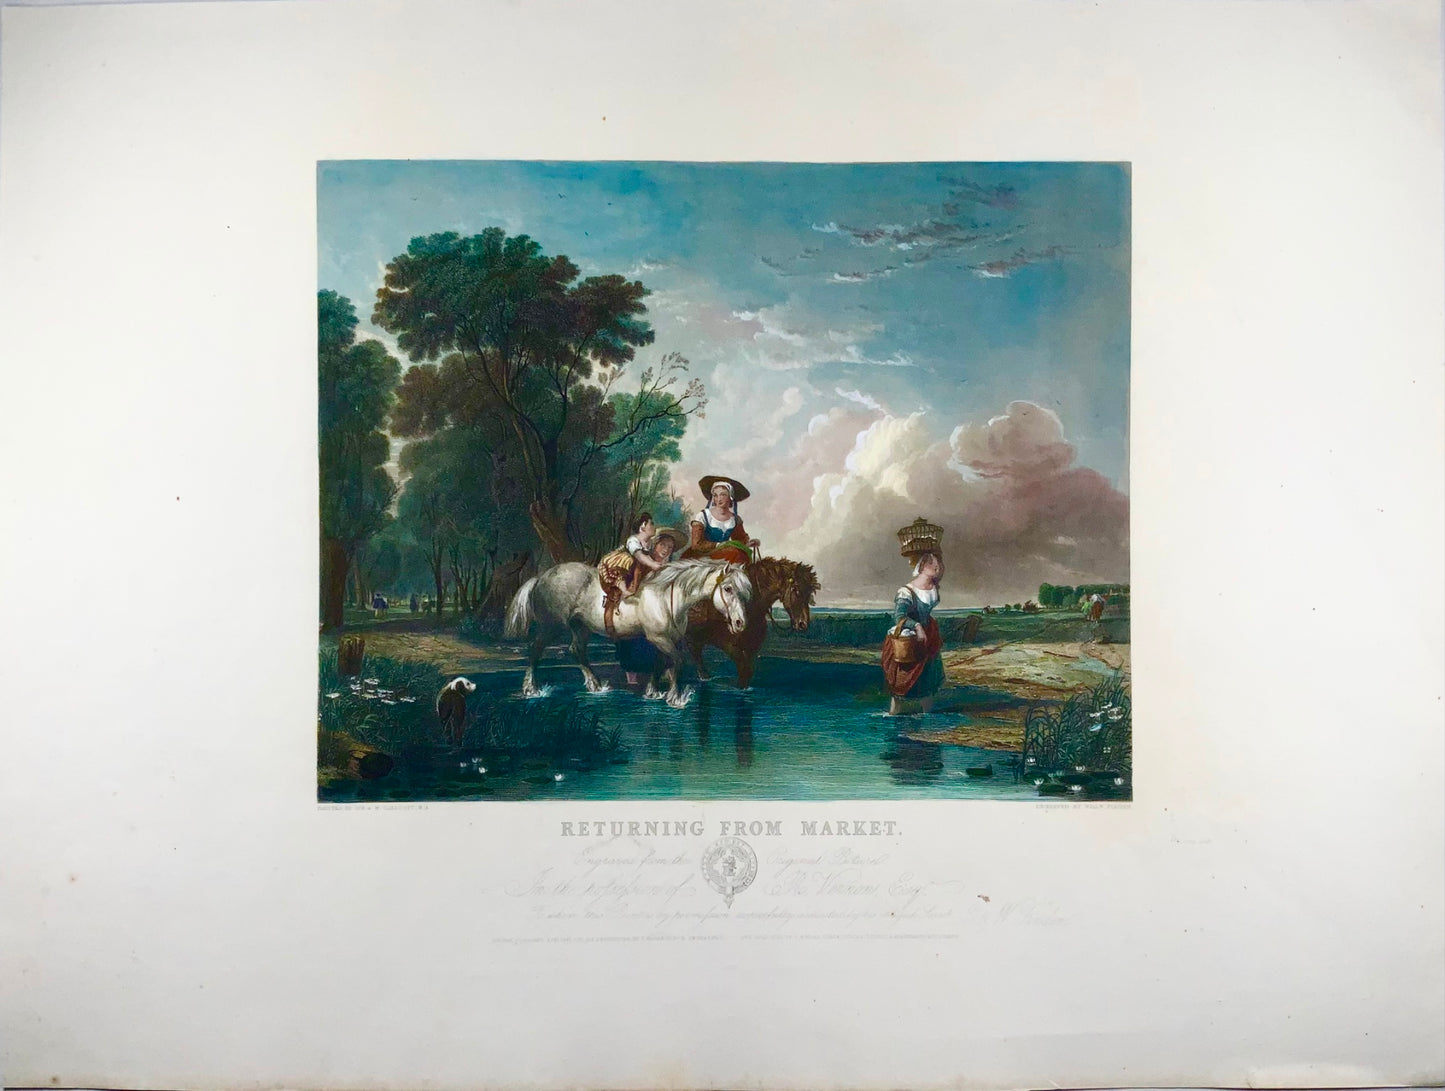 1845 Returning from Market, A.W. Calcott, very large 55cm coloured engraving, landscape